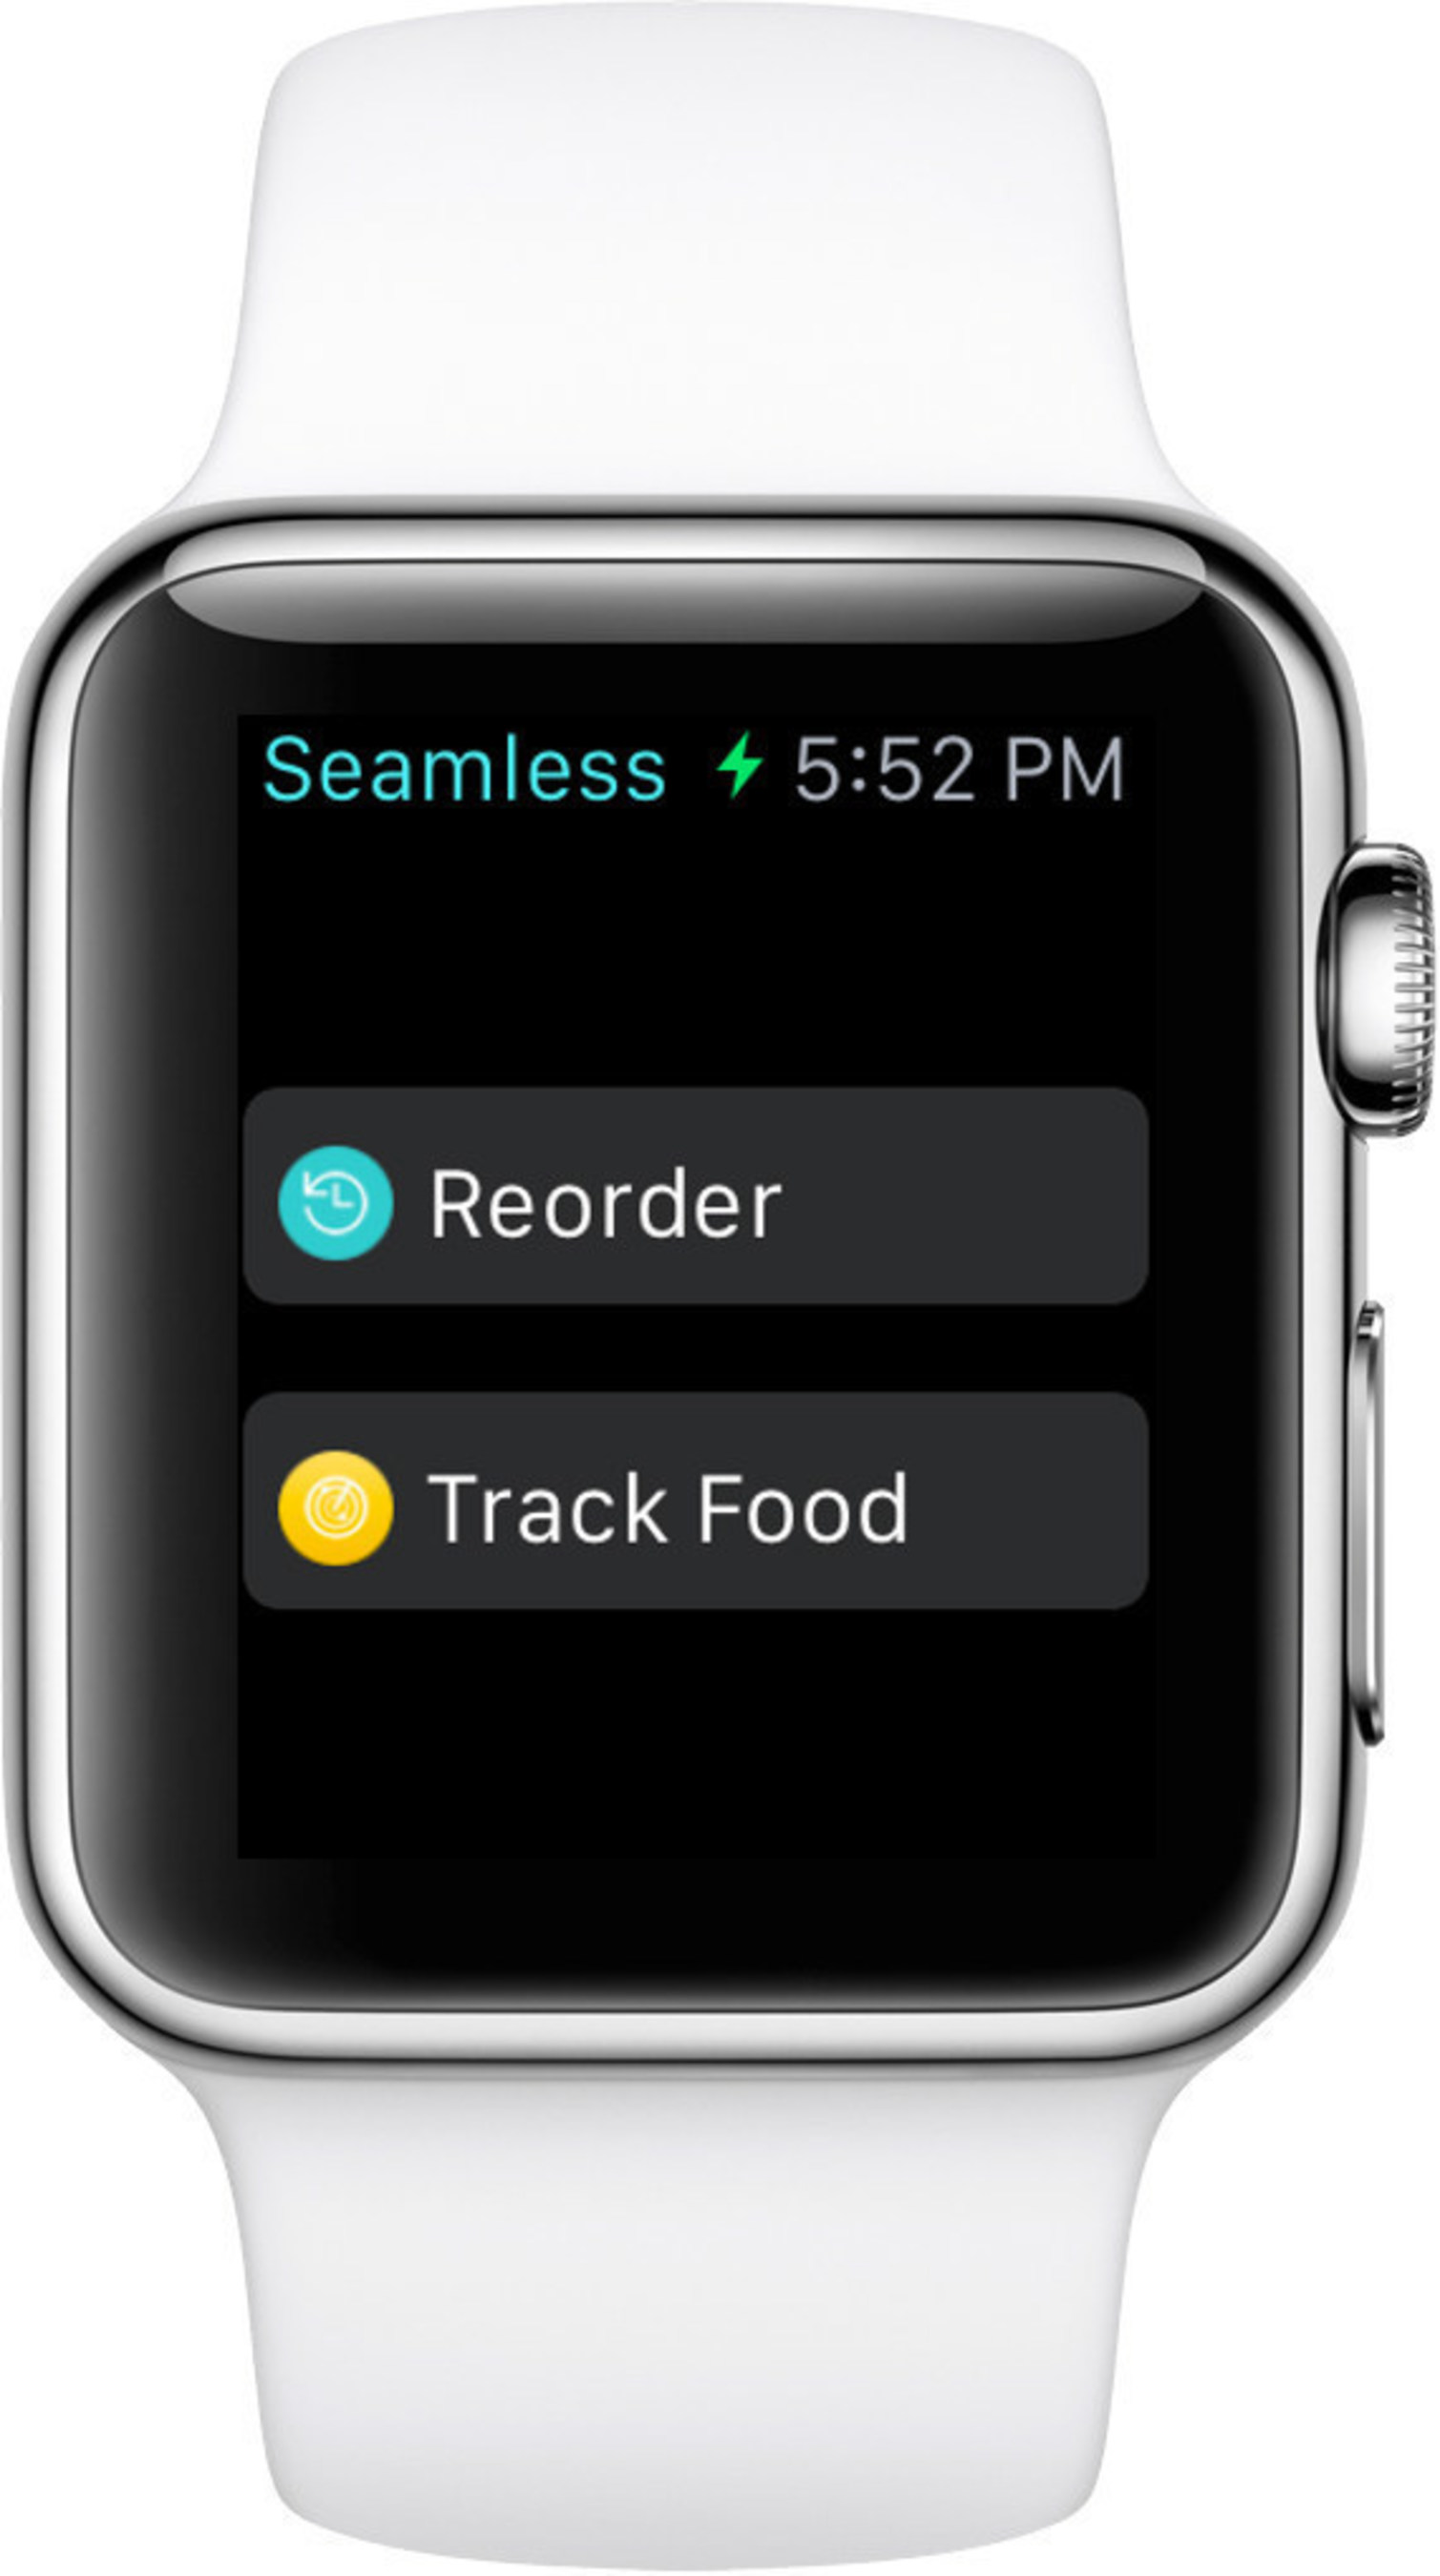 The Seamless Apple Watch app allows diners to reorder food and track orders.